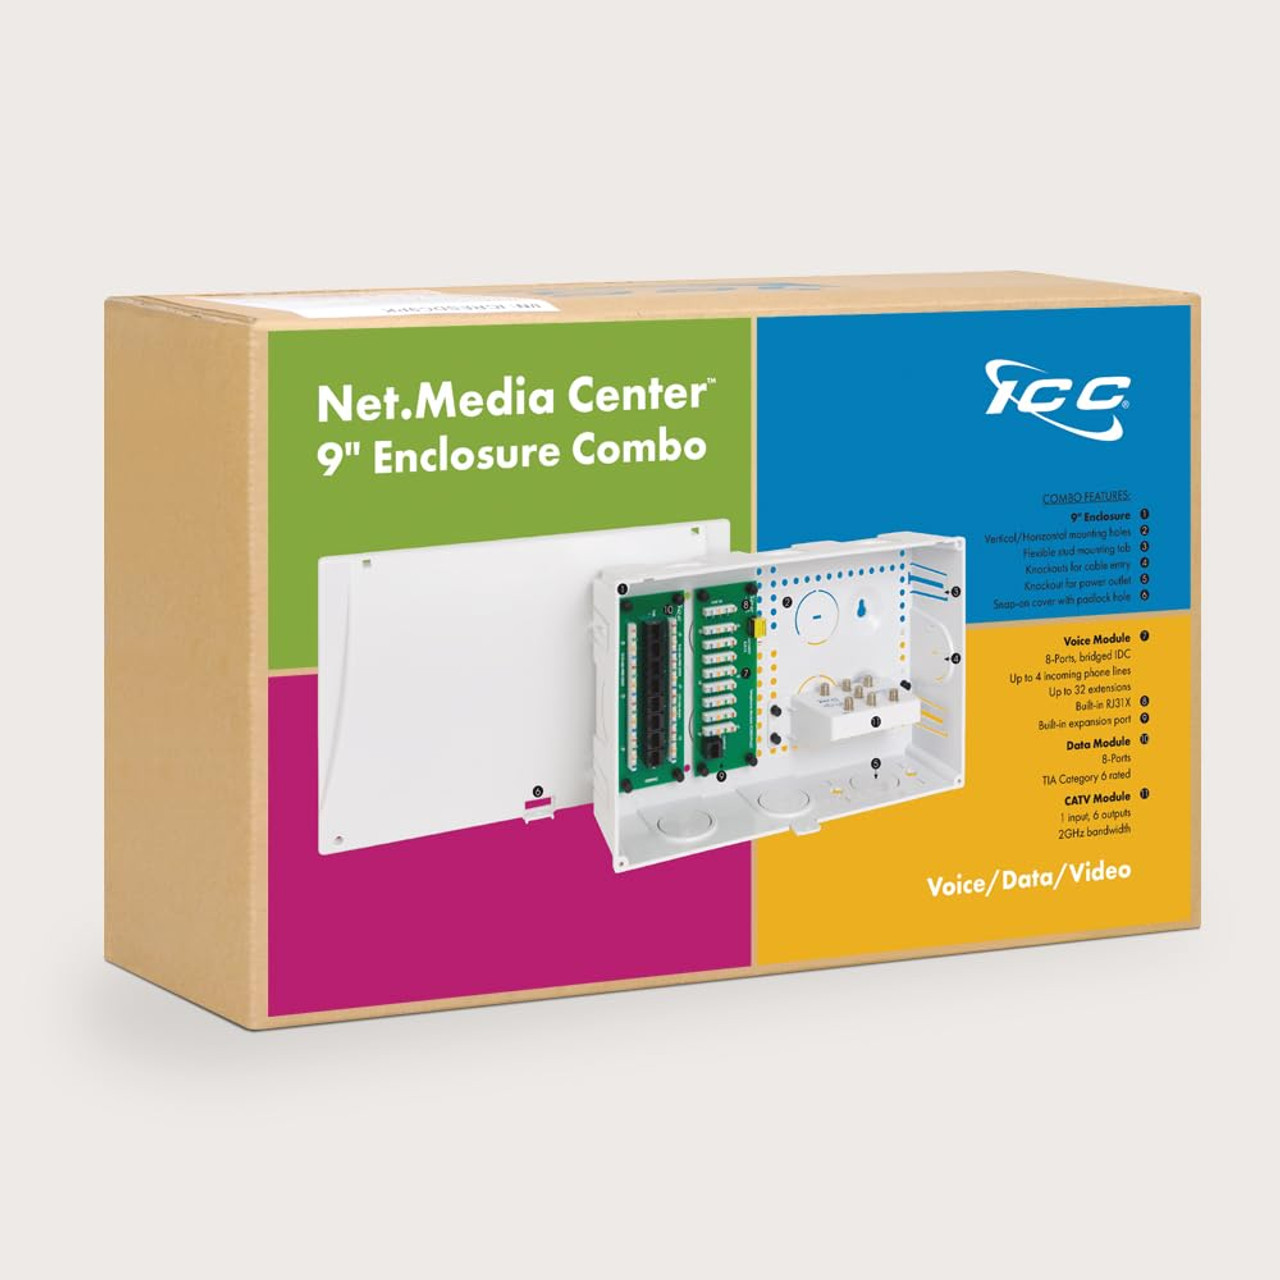 ICC 9” Plastic Structured Wiring Enclosure, Media Enclosure with Voice, Data, and Video Modules with Cover, Recessed Wall Box for Distribution of Networking Services, White